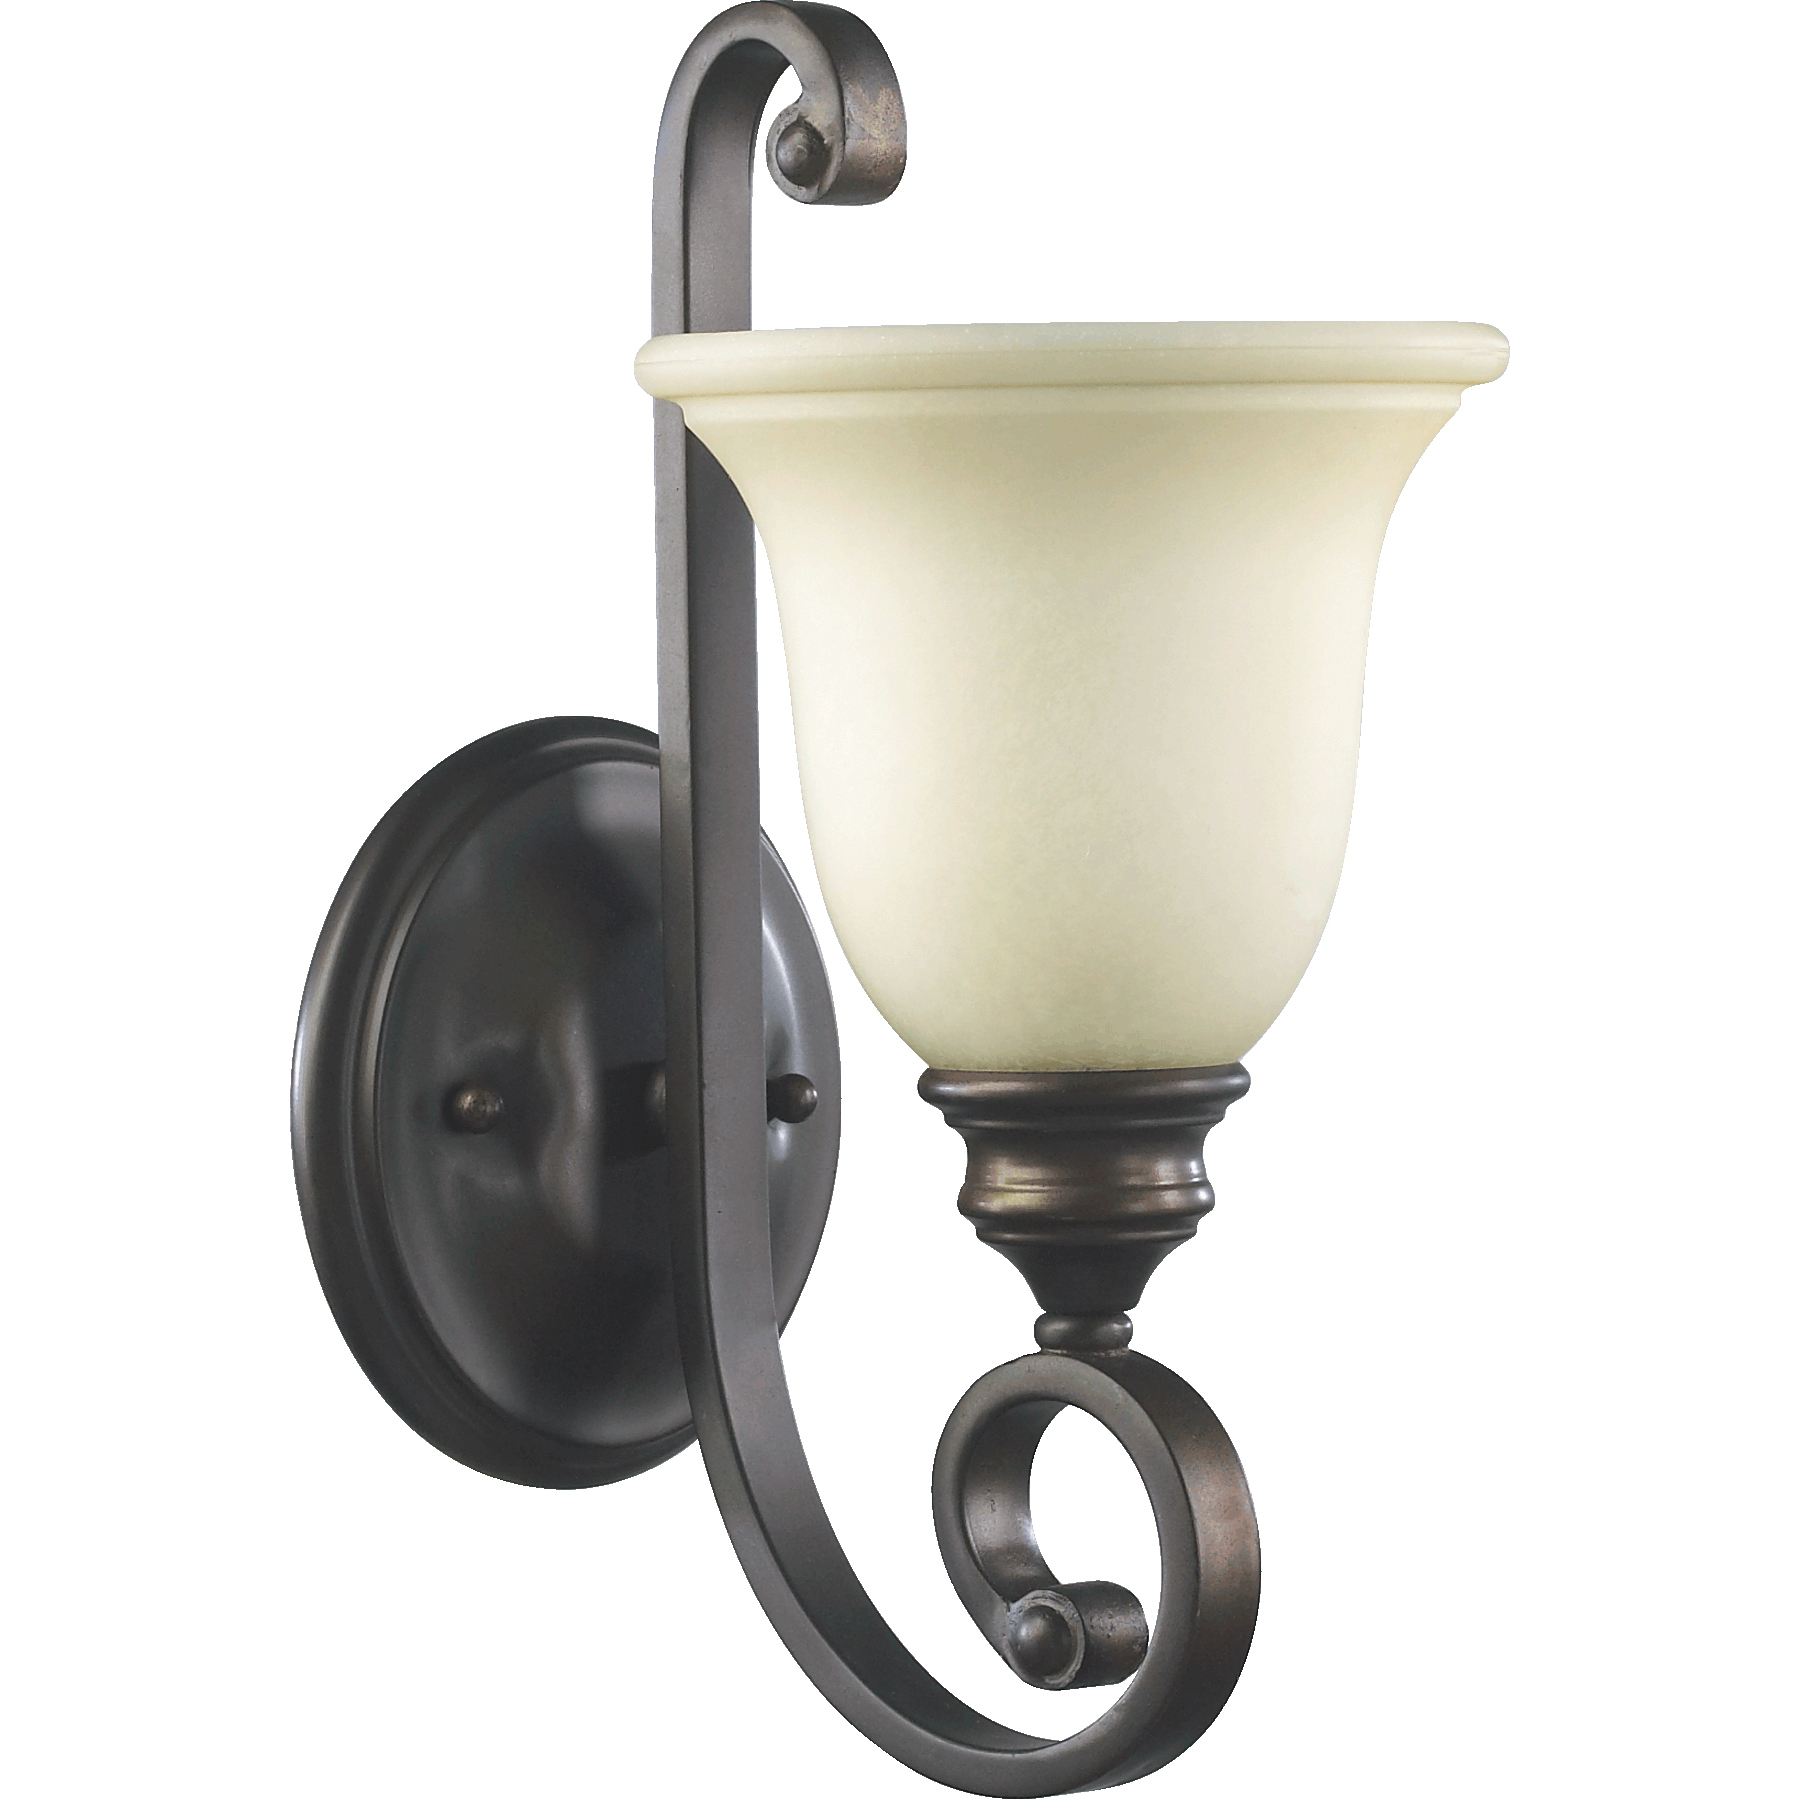 Lights of Tuscany 15904-4 European French Country Semi Flush